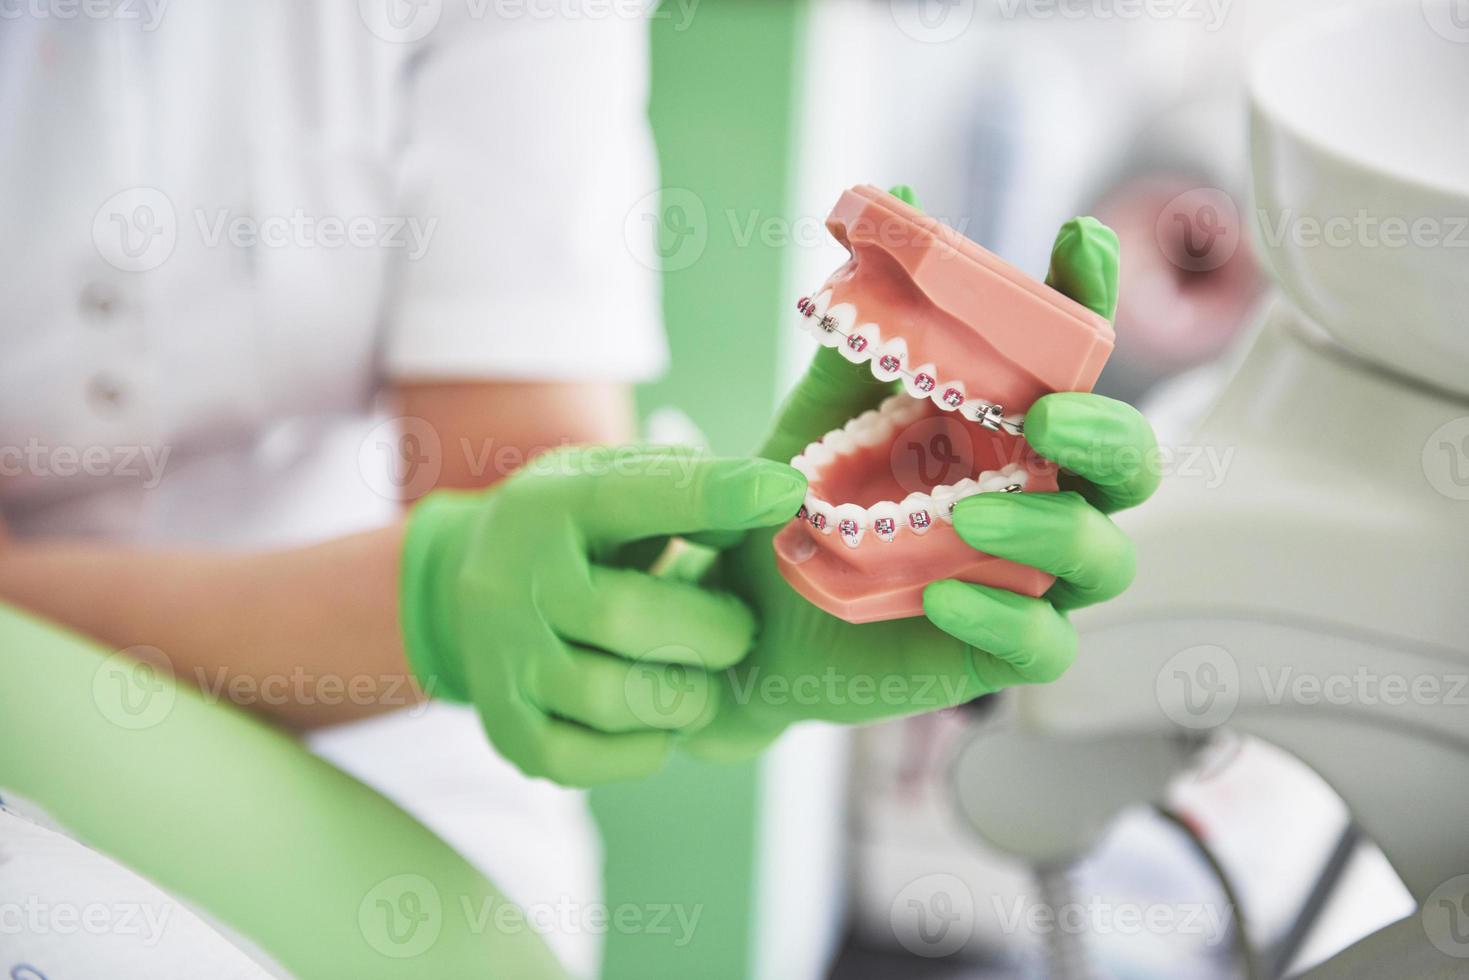 The dentist demonstrates how the braces are correcting the teeth using an artificial jaw model photo